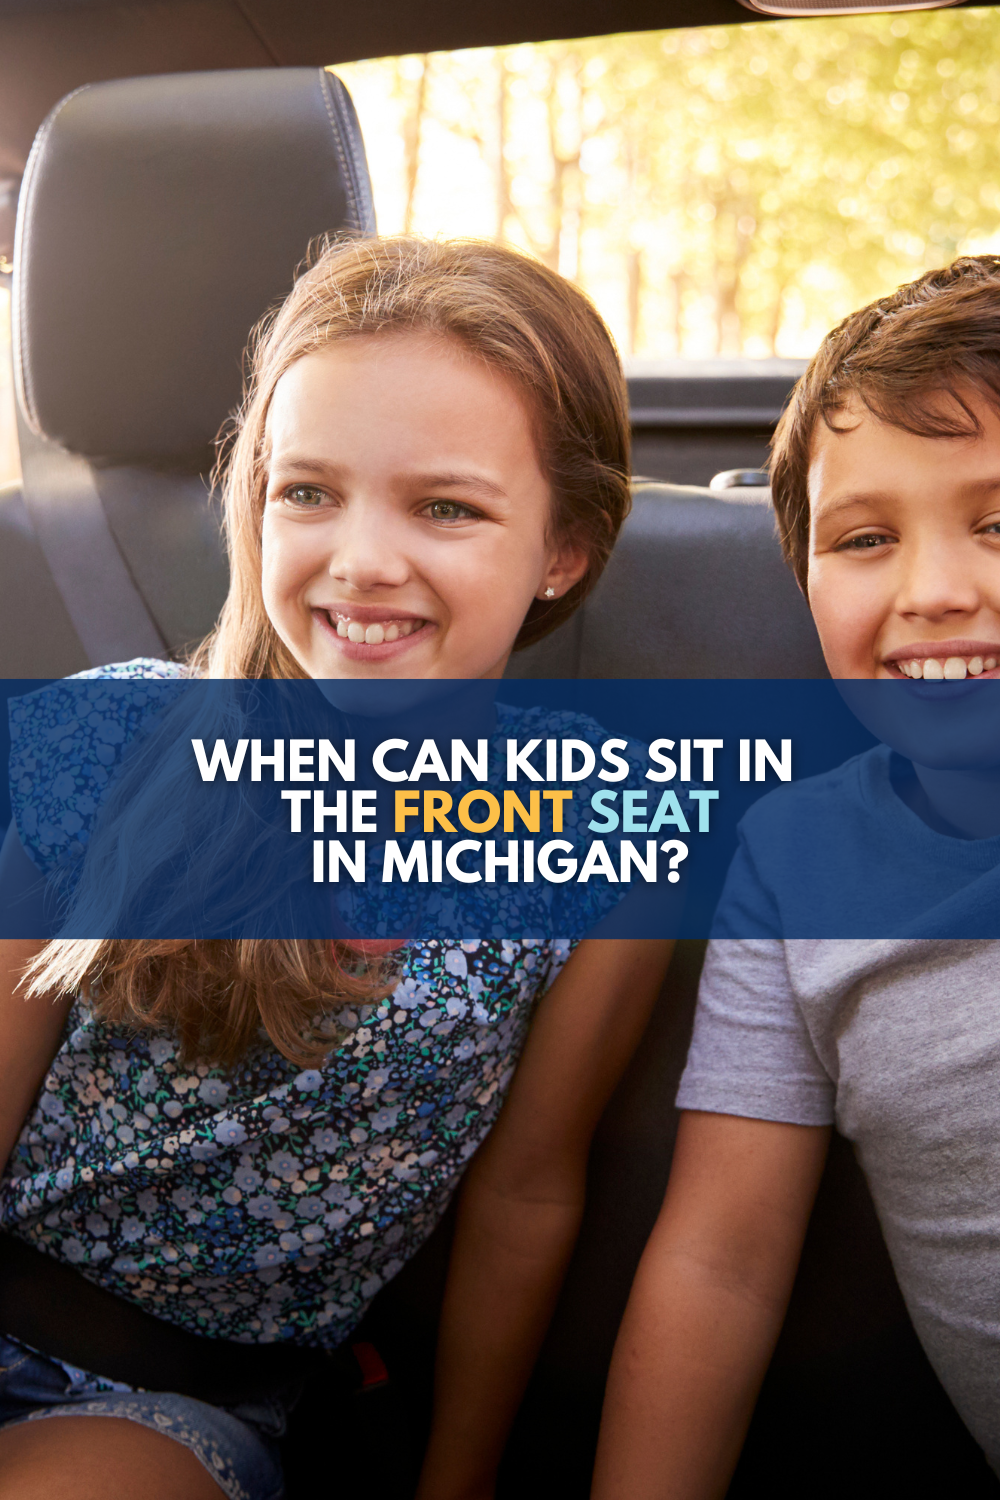 When Can Kids Sit In The Front Seat In Michigan?